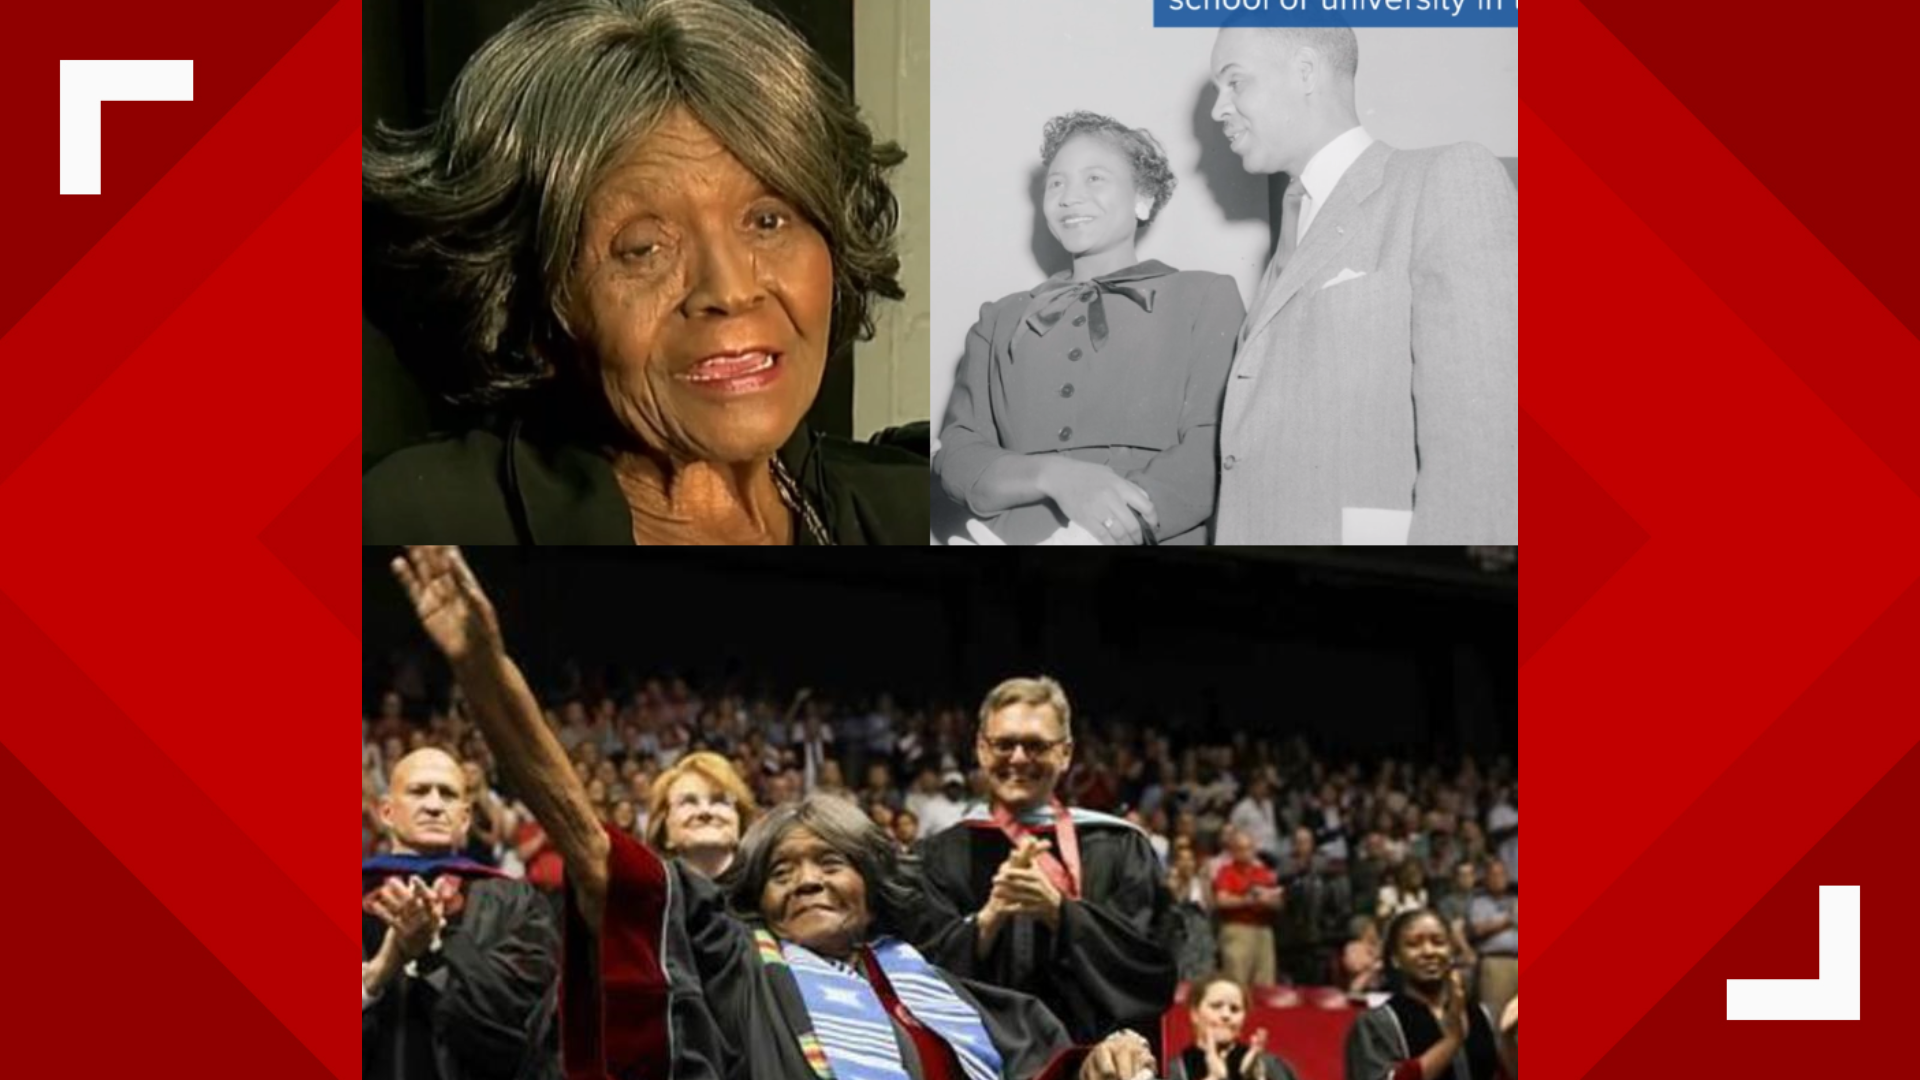 University of Alabama's first black student, Autherine Lucy Foster was ousted after 3 days, 63 years later she receives honorary degree.